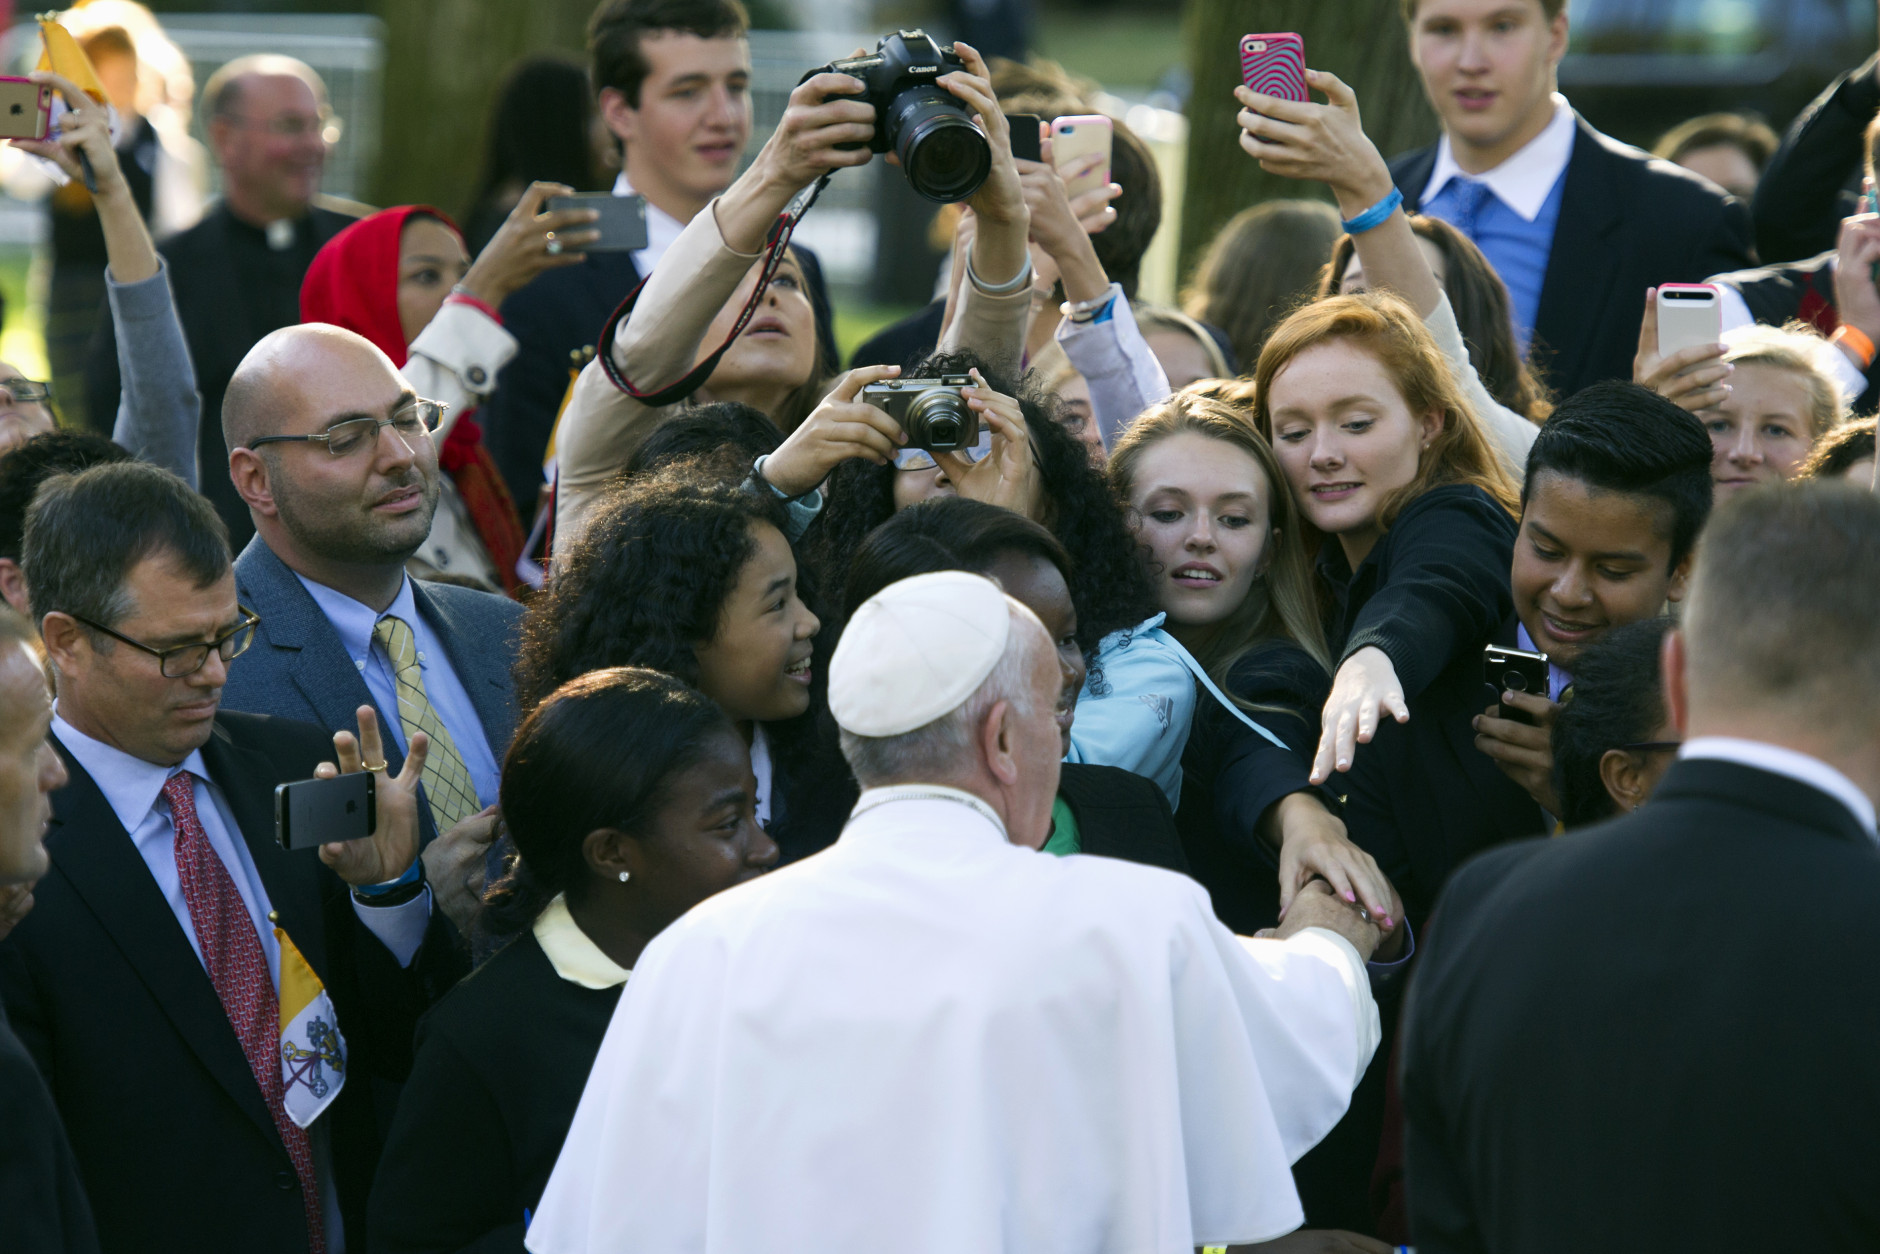 Pope Francis greets well-wishers as he departs the Apostolic Nunciature, the Vatican's diplomatic mission inWashington, Wednesday, Sept. 23, 2015. Pope Francis will visit the White House where President Barack Obama will host a state arrival ceremony.  (AP Photo/Cliff Owen)